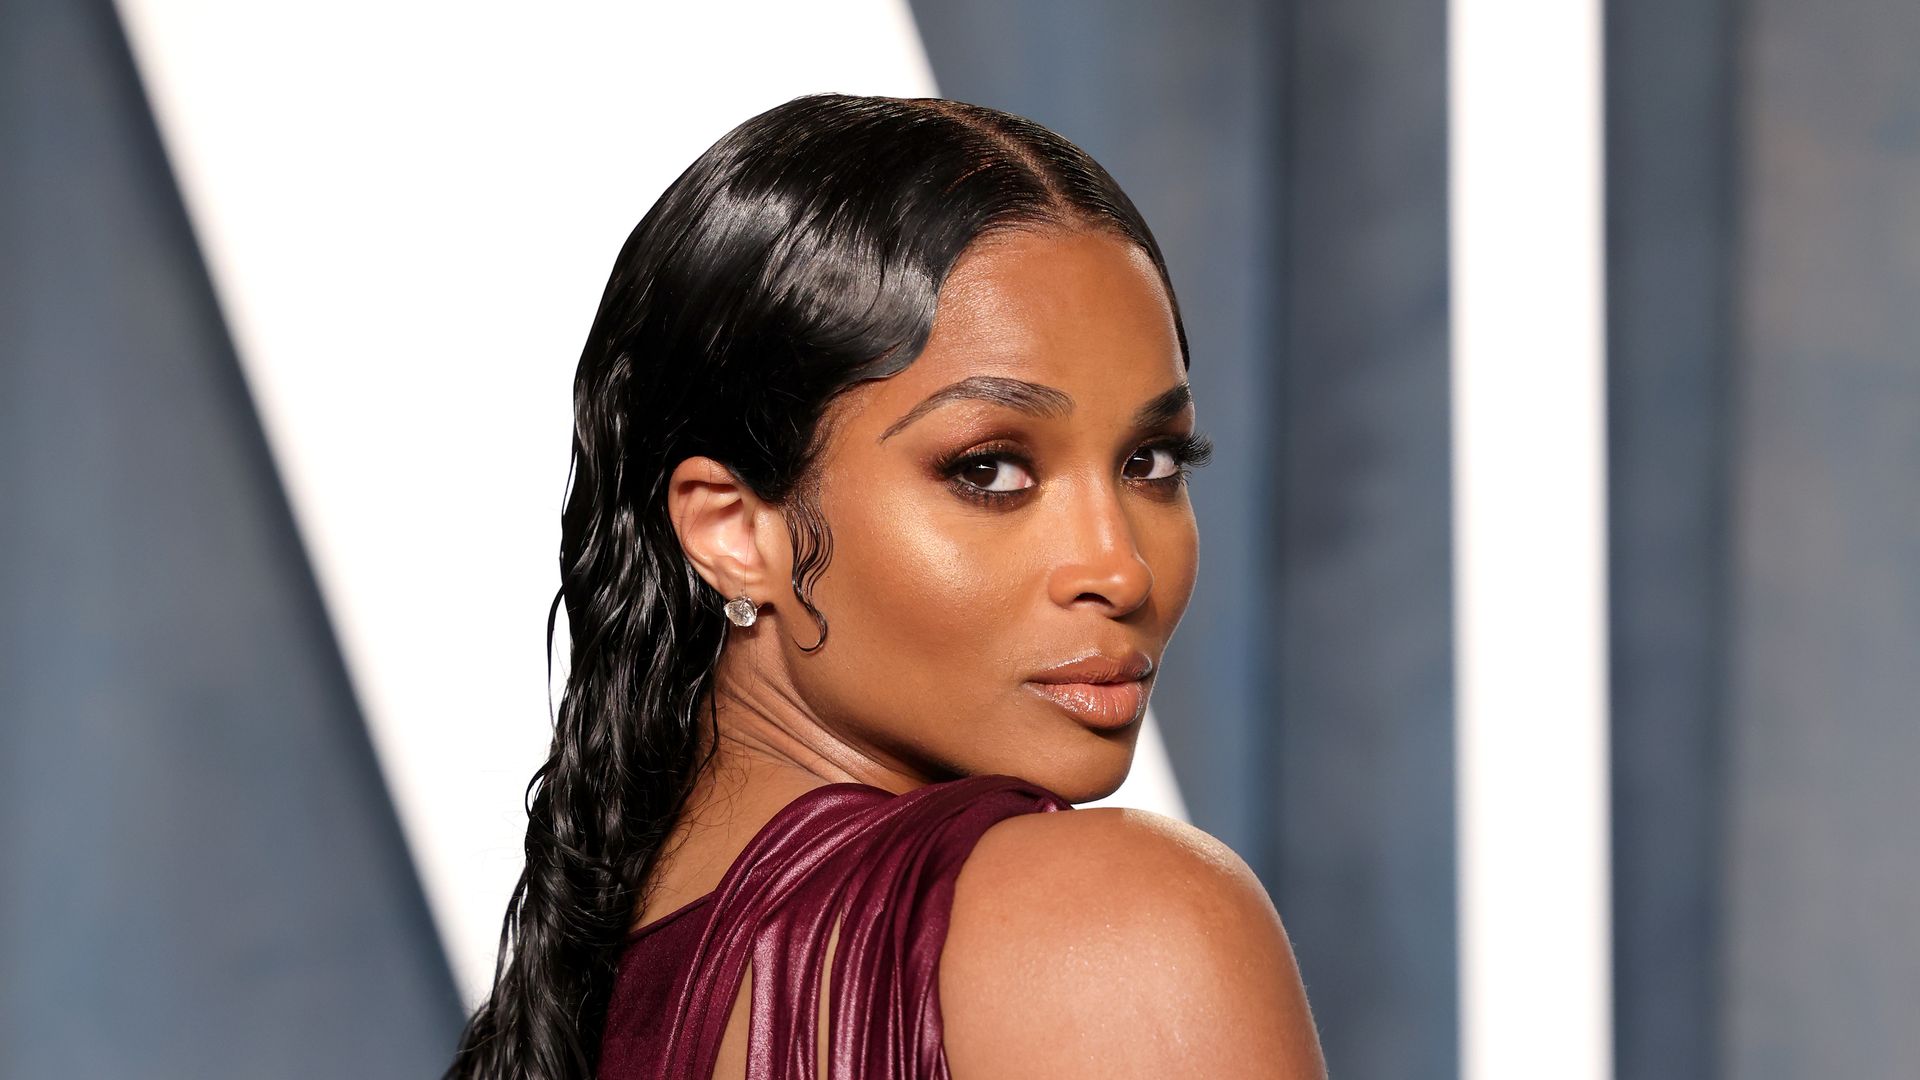 Ciara attends the 2022 Vanity Fair Oscar Party Hosted By Radhika Jones on March 27, 2022 in Beverly Hills, California